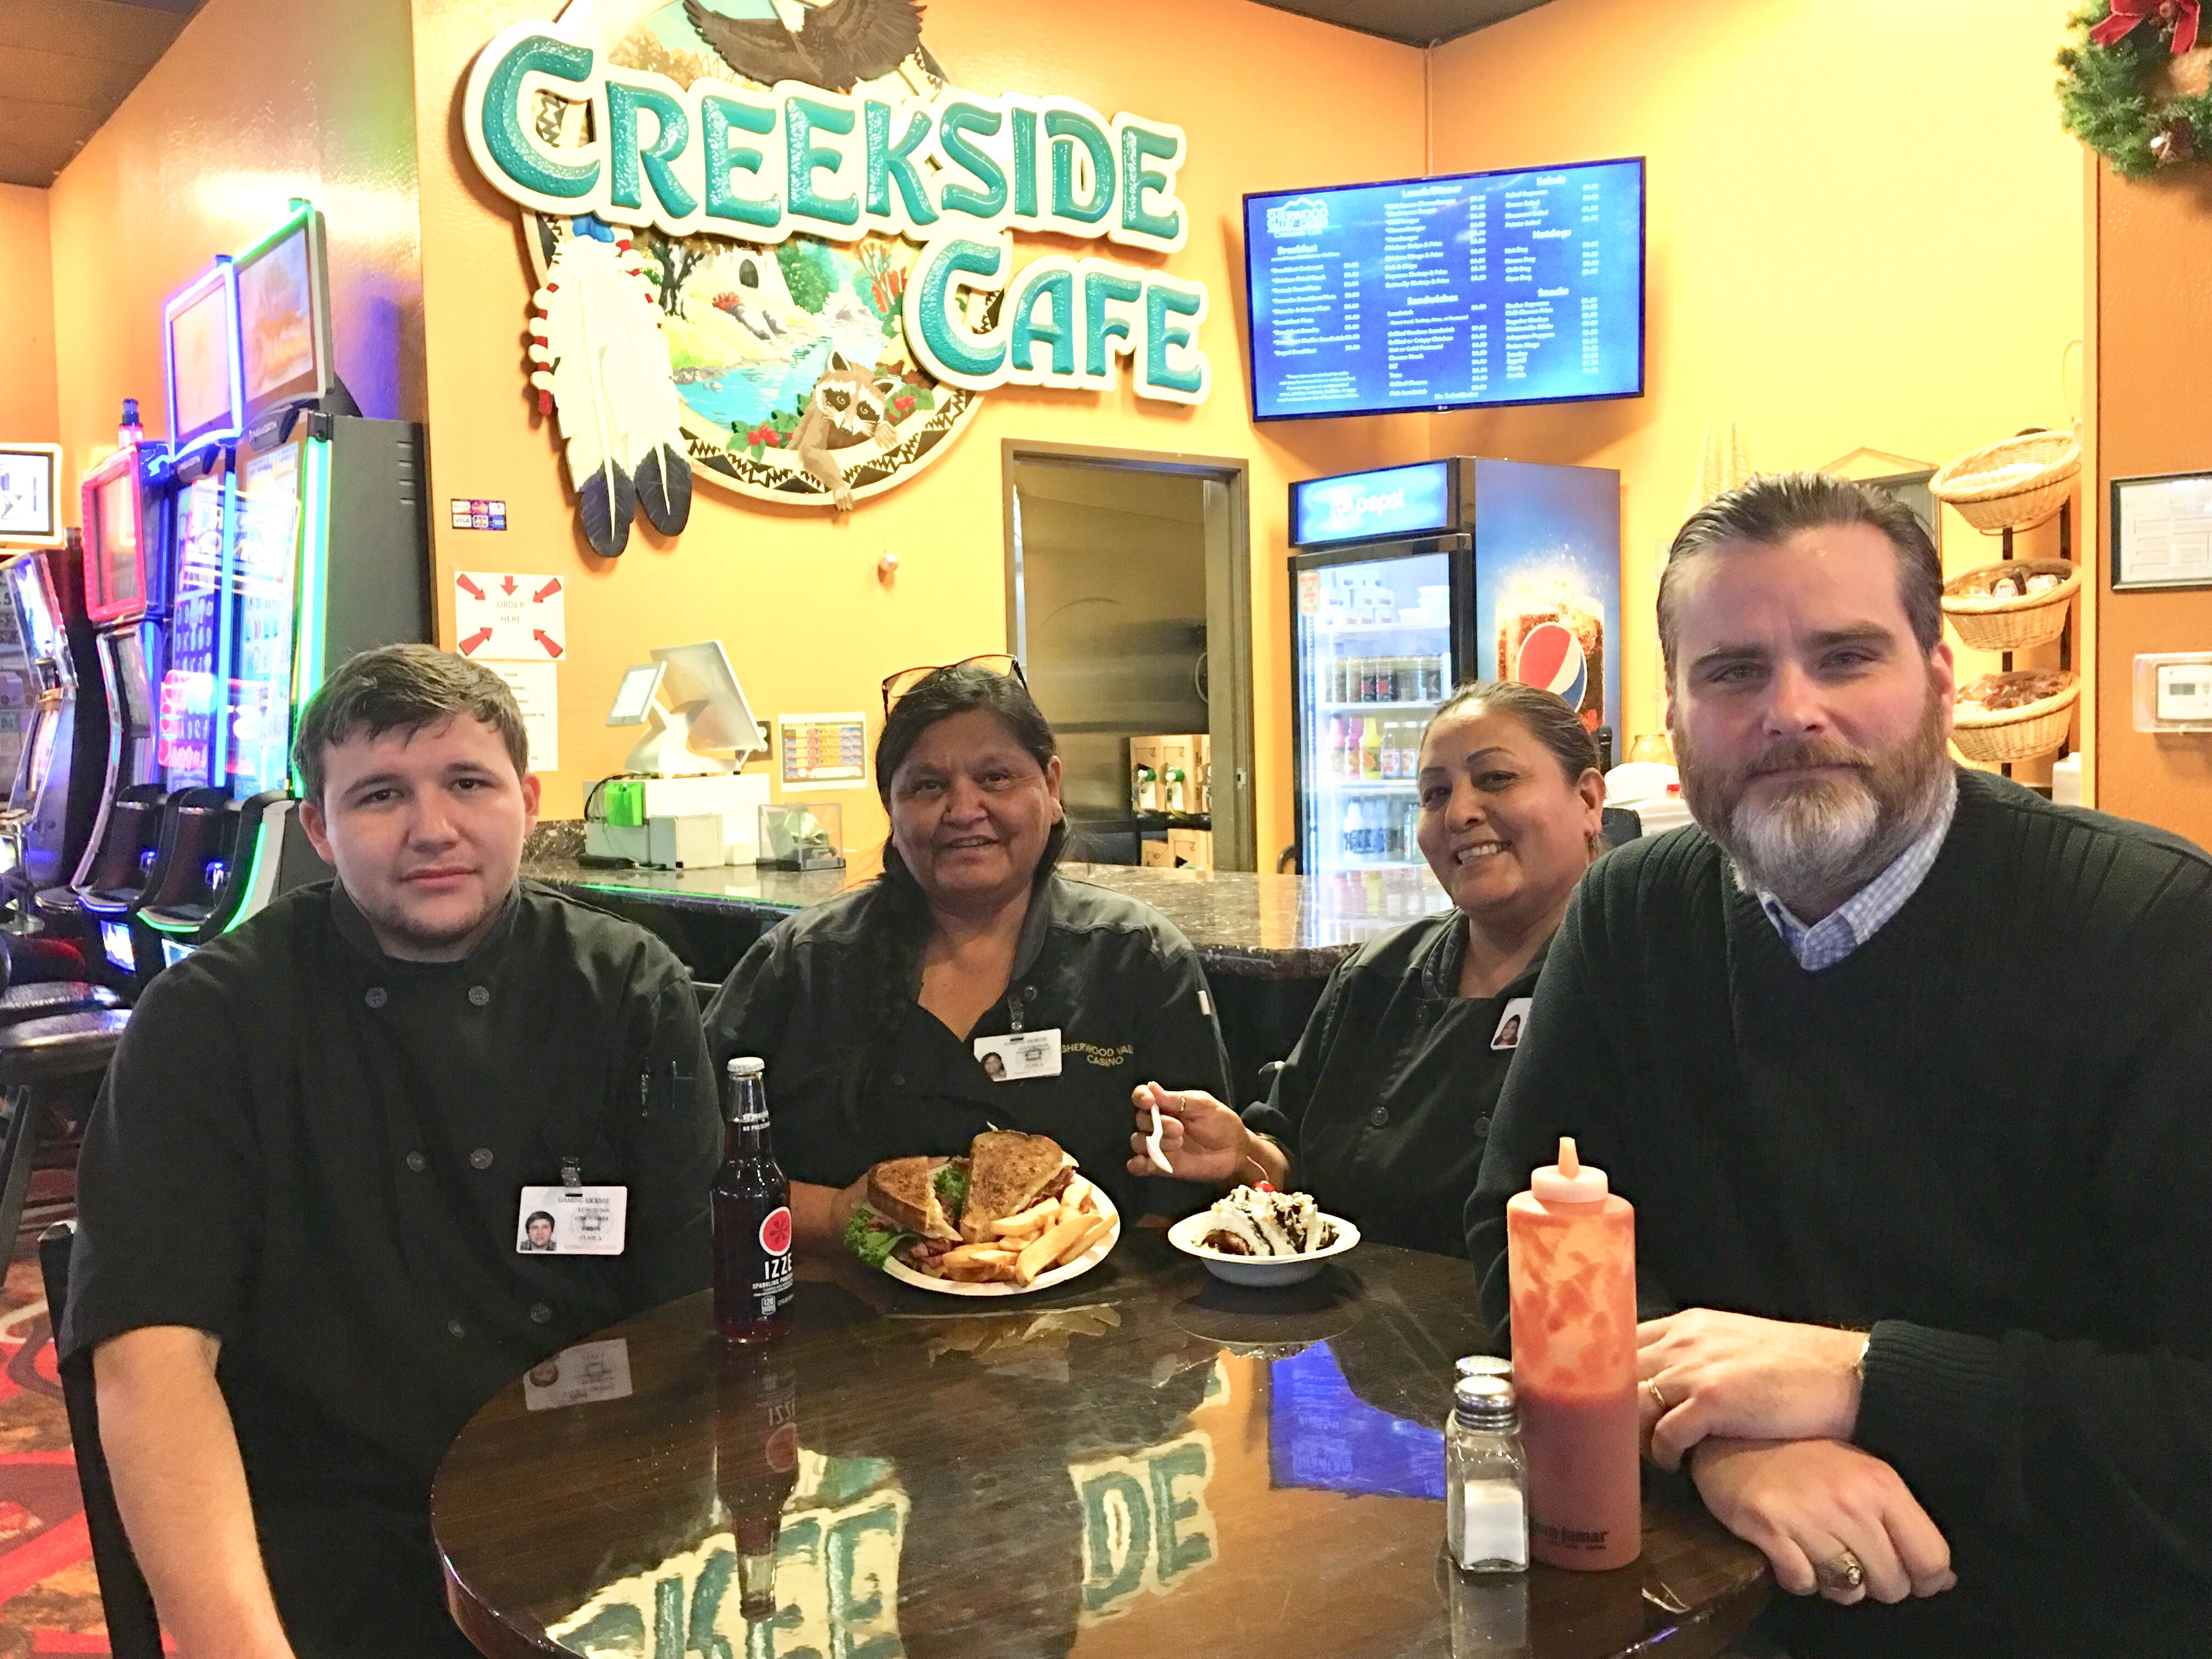 Team Members of the Sherwood Valley Casino Food and Beverage Department are Ready to Serve Furloughed Federal Employees in Their Time of Need. Pictured Left to right: Ryan Sloan, F&B Team Member, Lucy